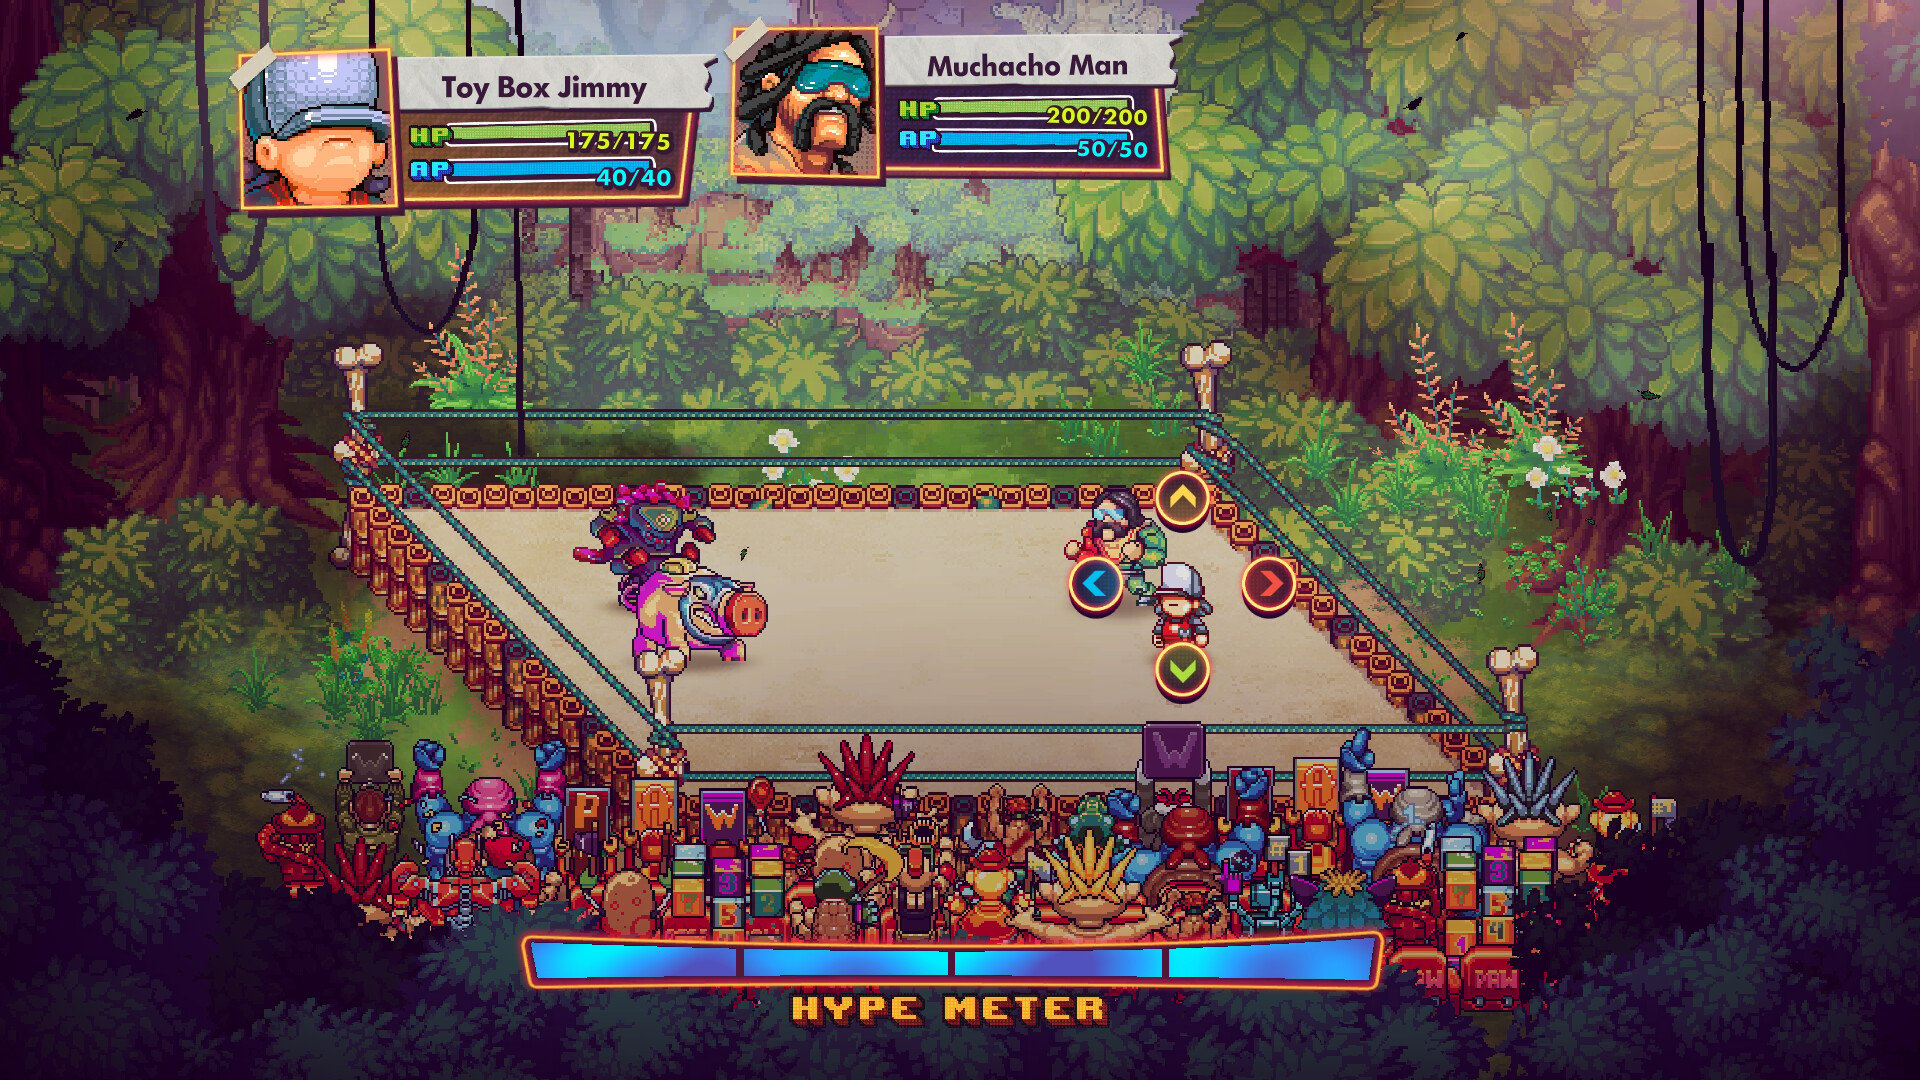 WrestleQuest Announced By Mega Cat Studios and Skybound Games